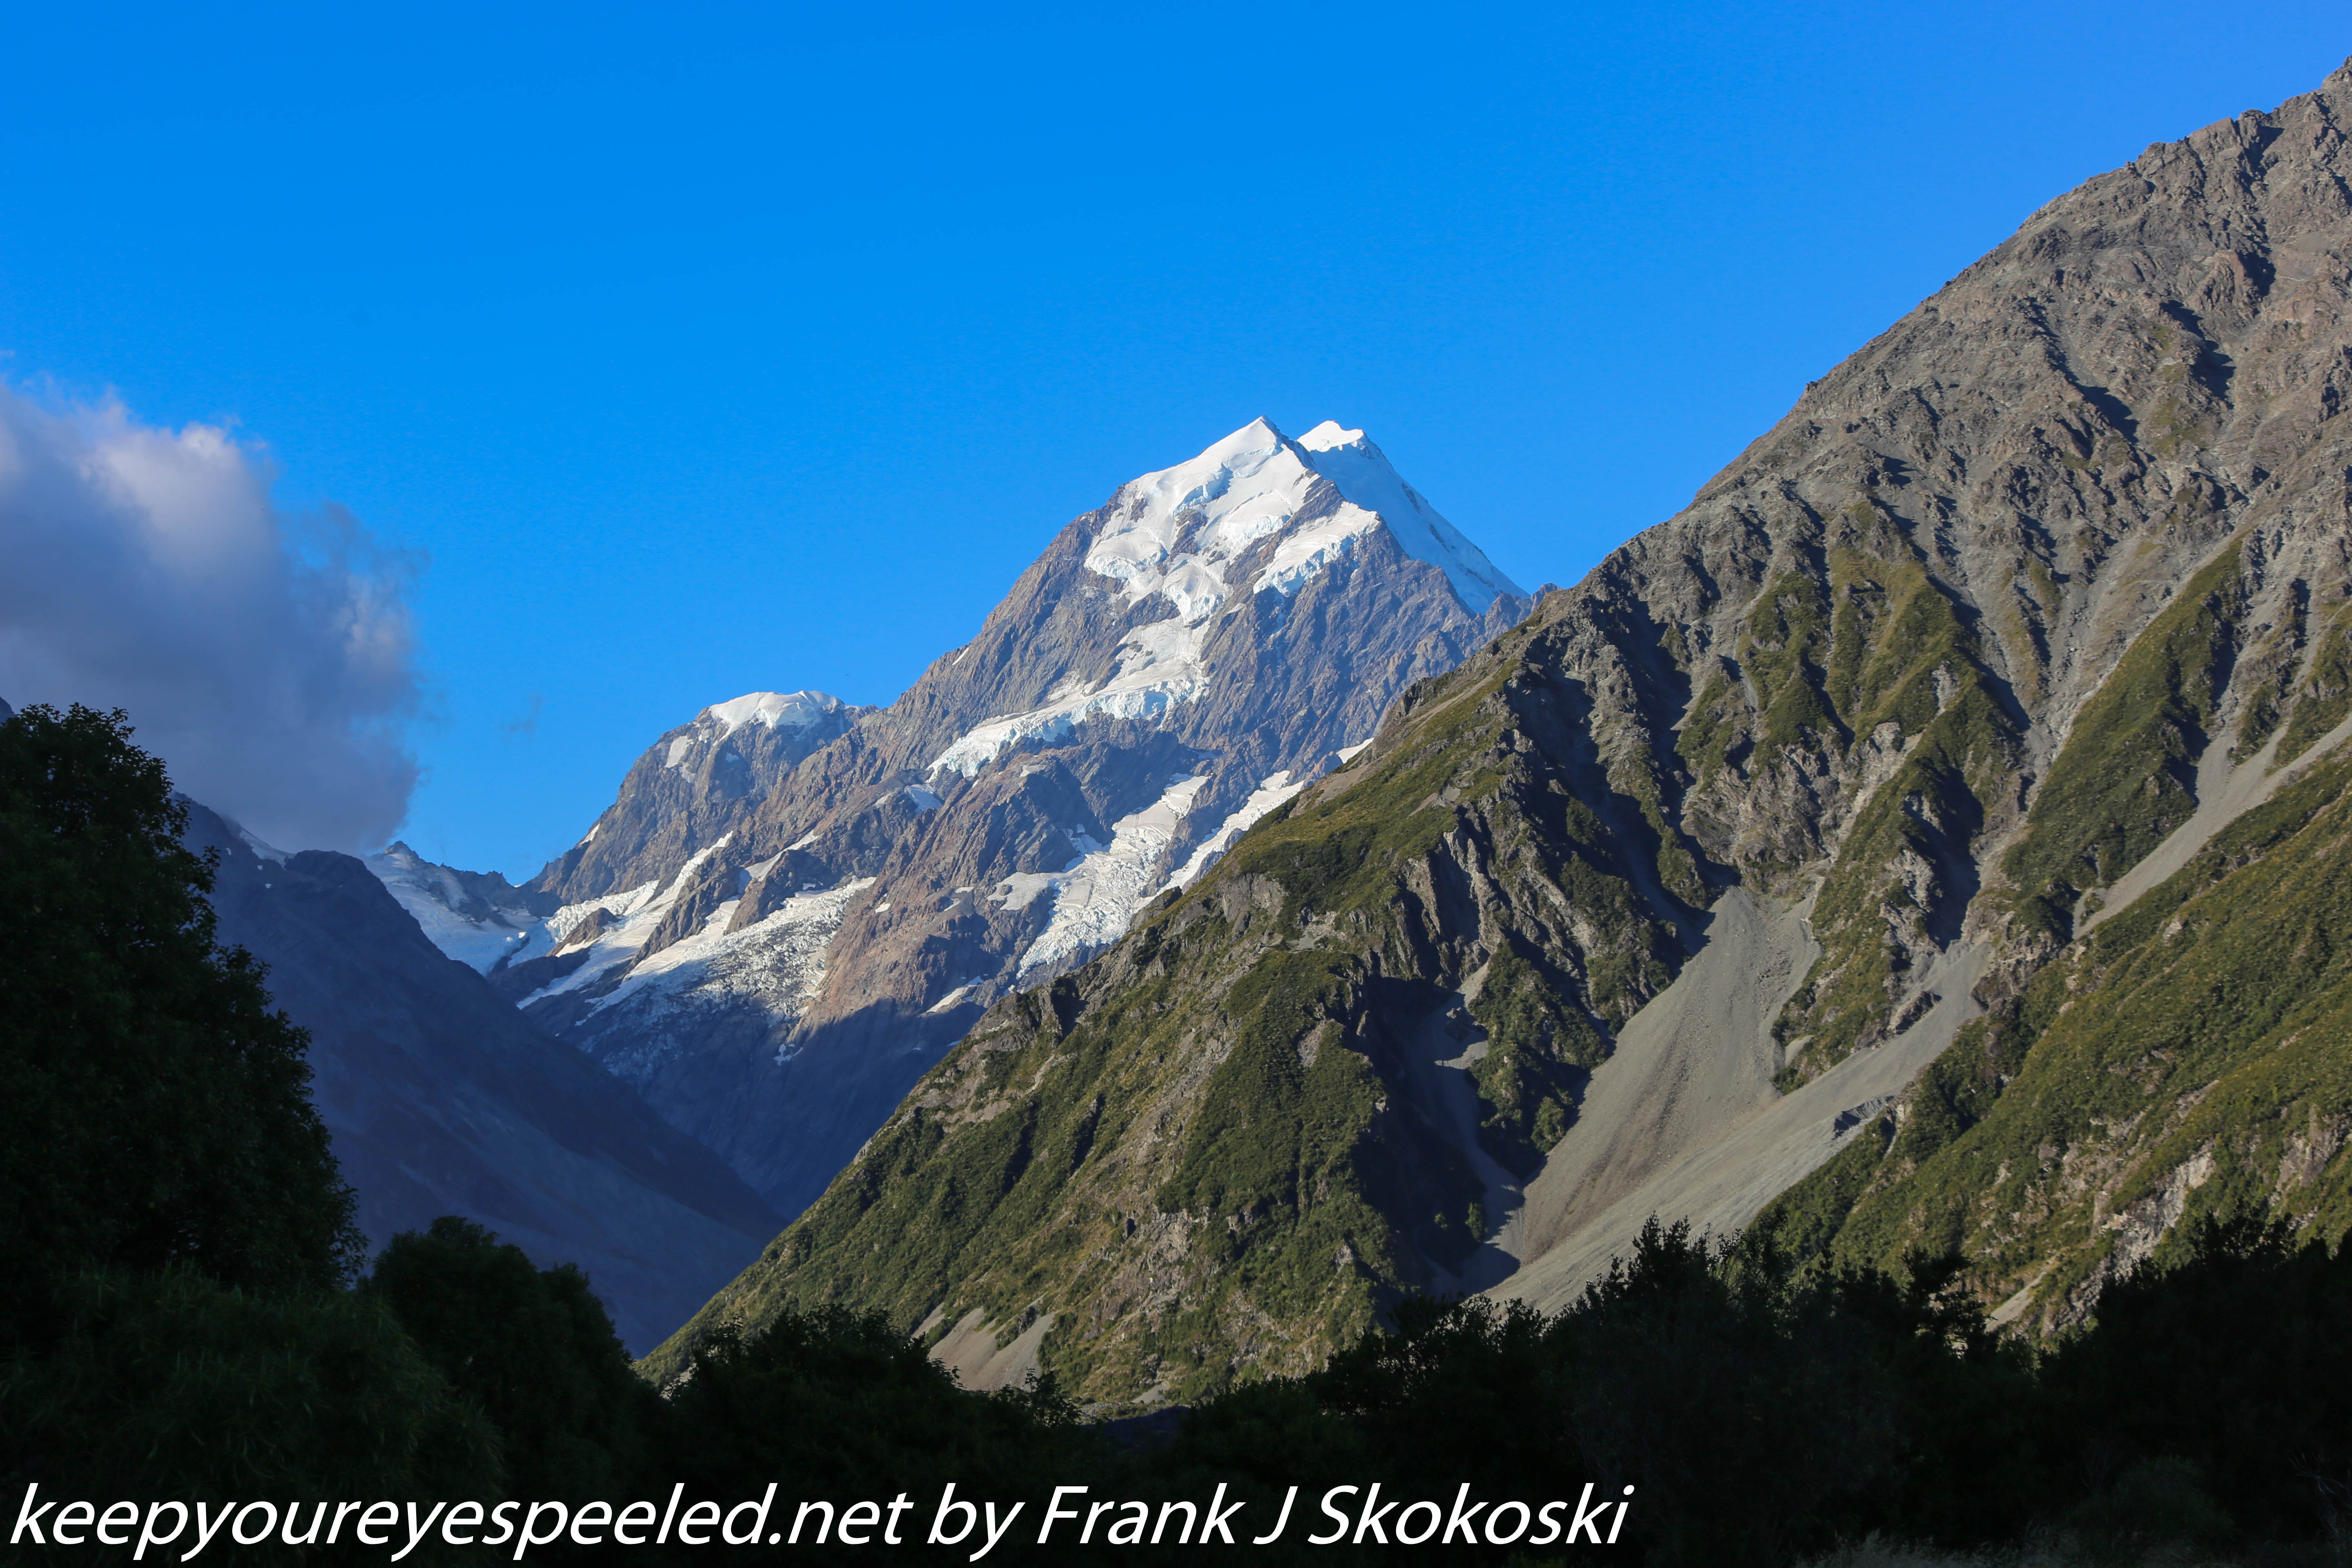 New-Zealand-Day-Five-Mount-Cook-lodge-7-of-8